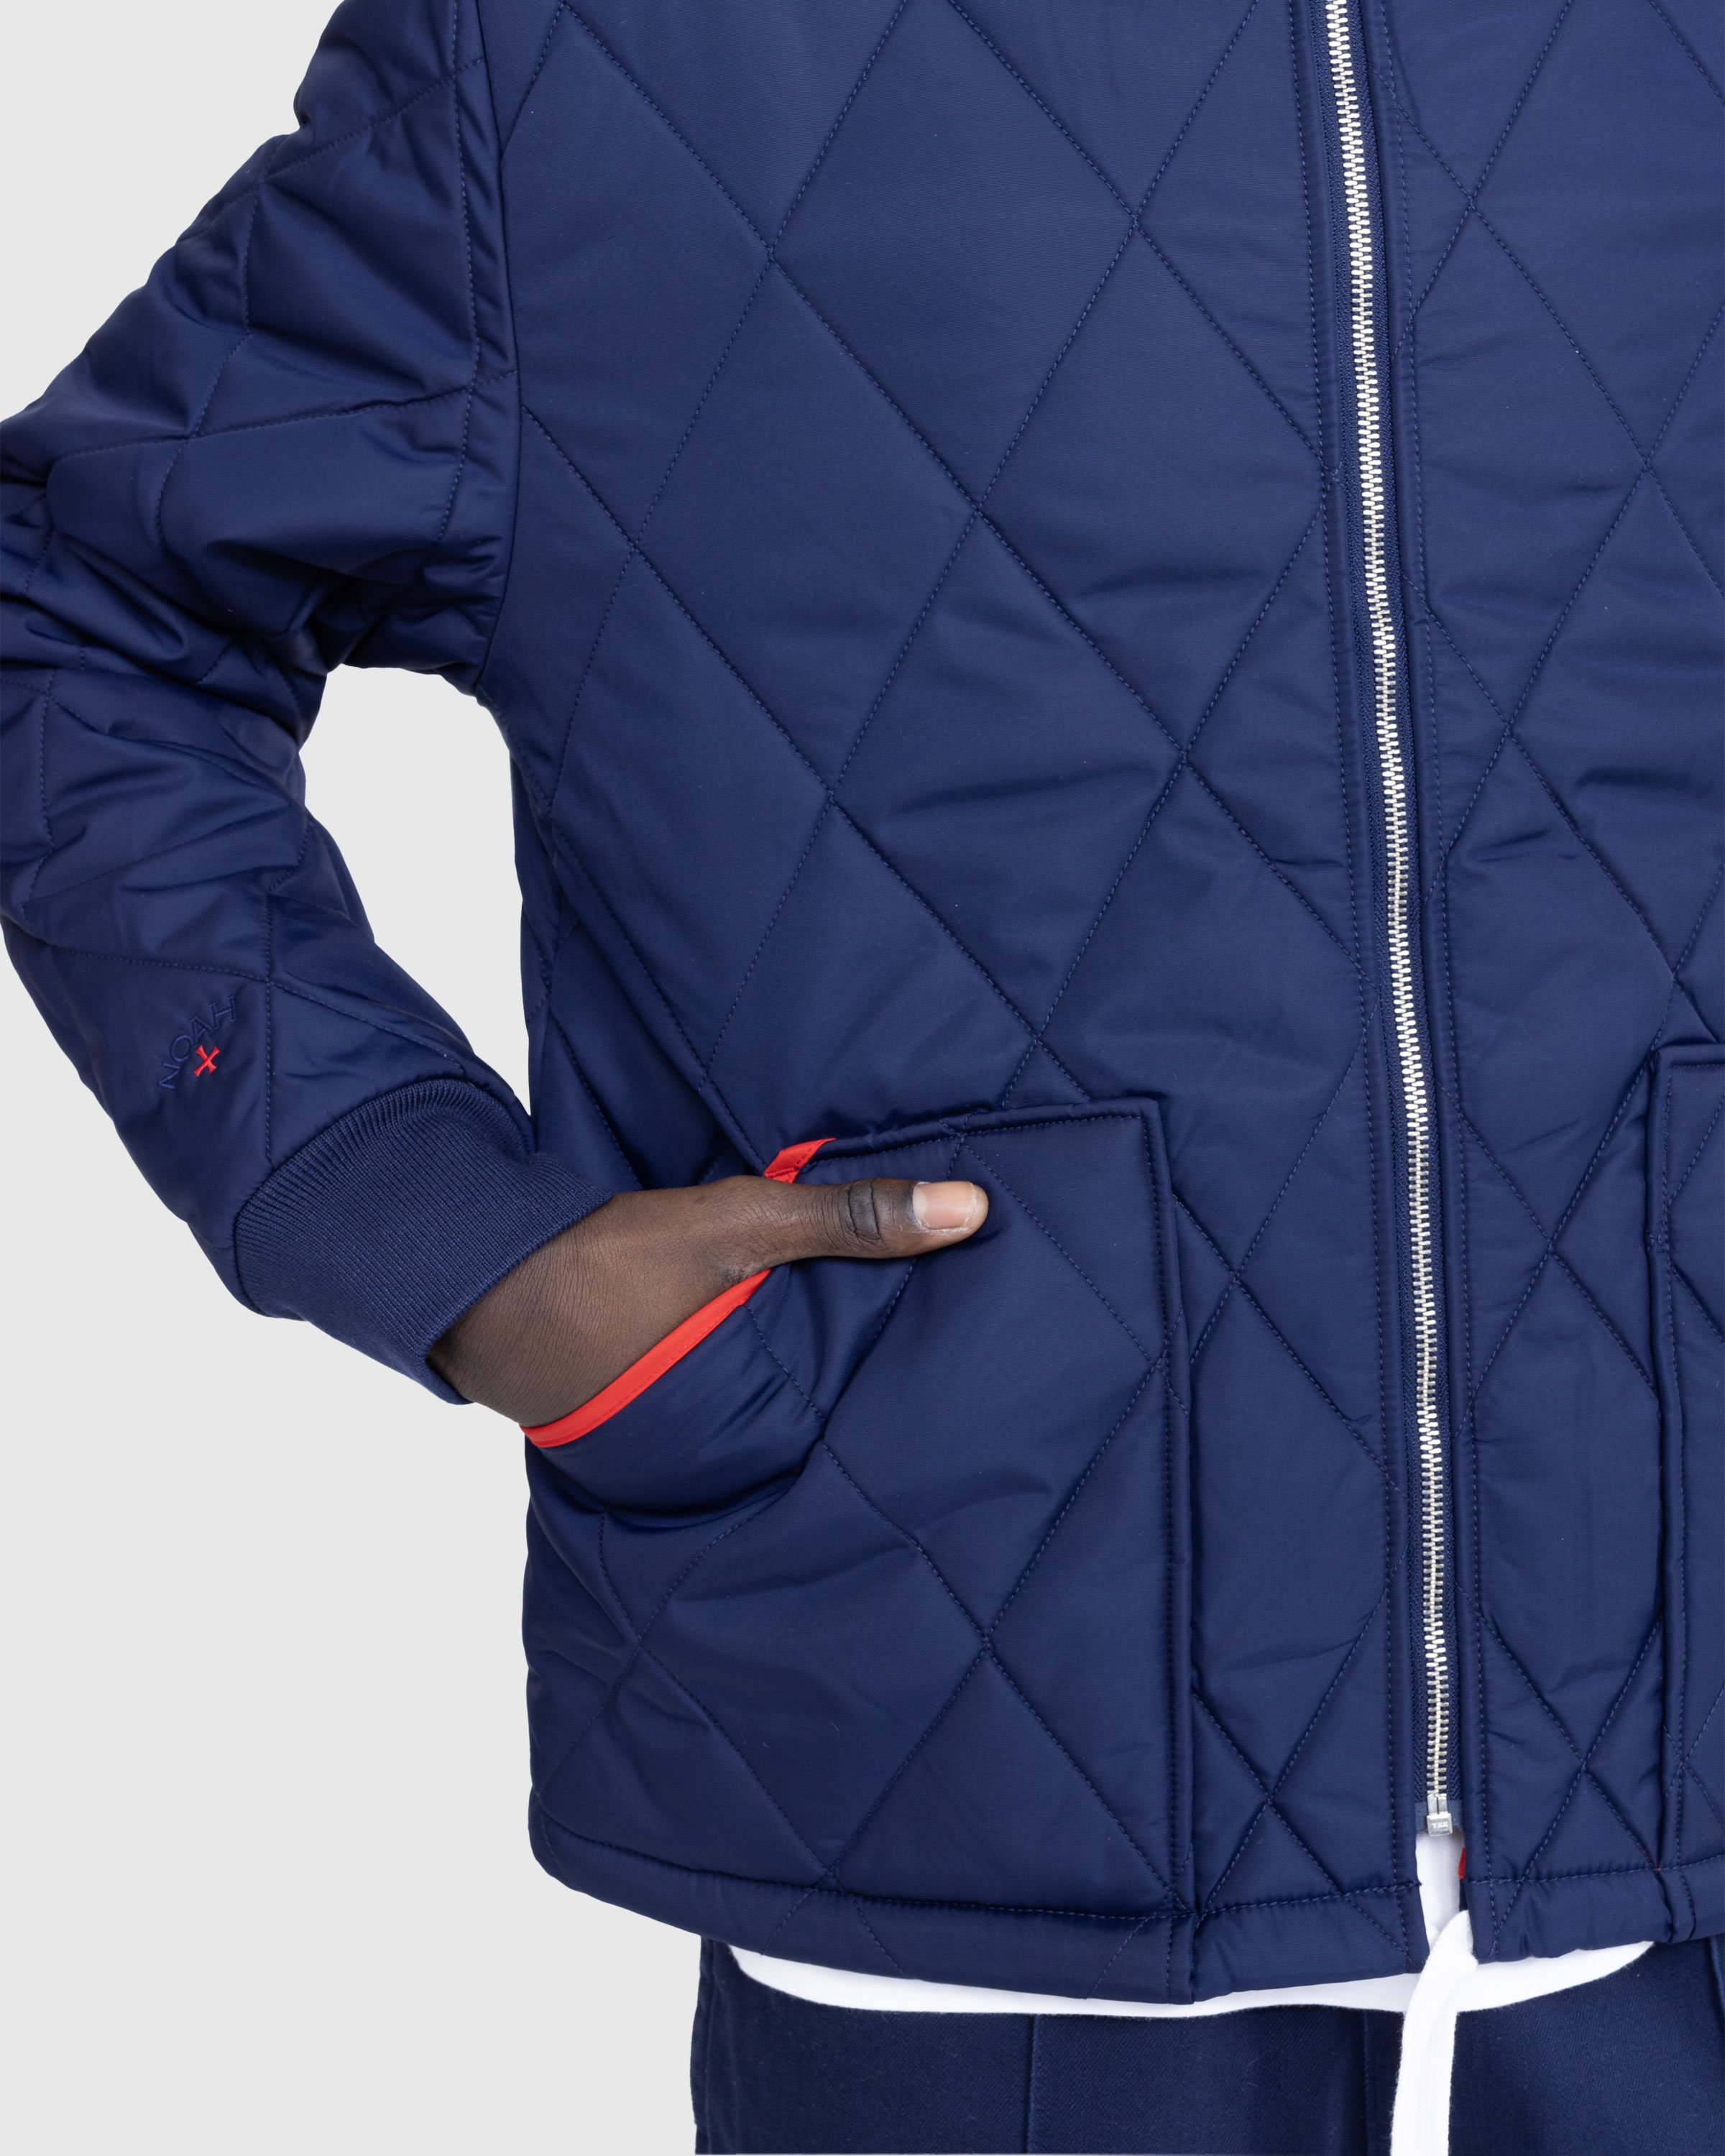 Puma x Noah - Water-Repellent Quilted Jacket Navy - Clothing - Blue - Image 6